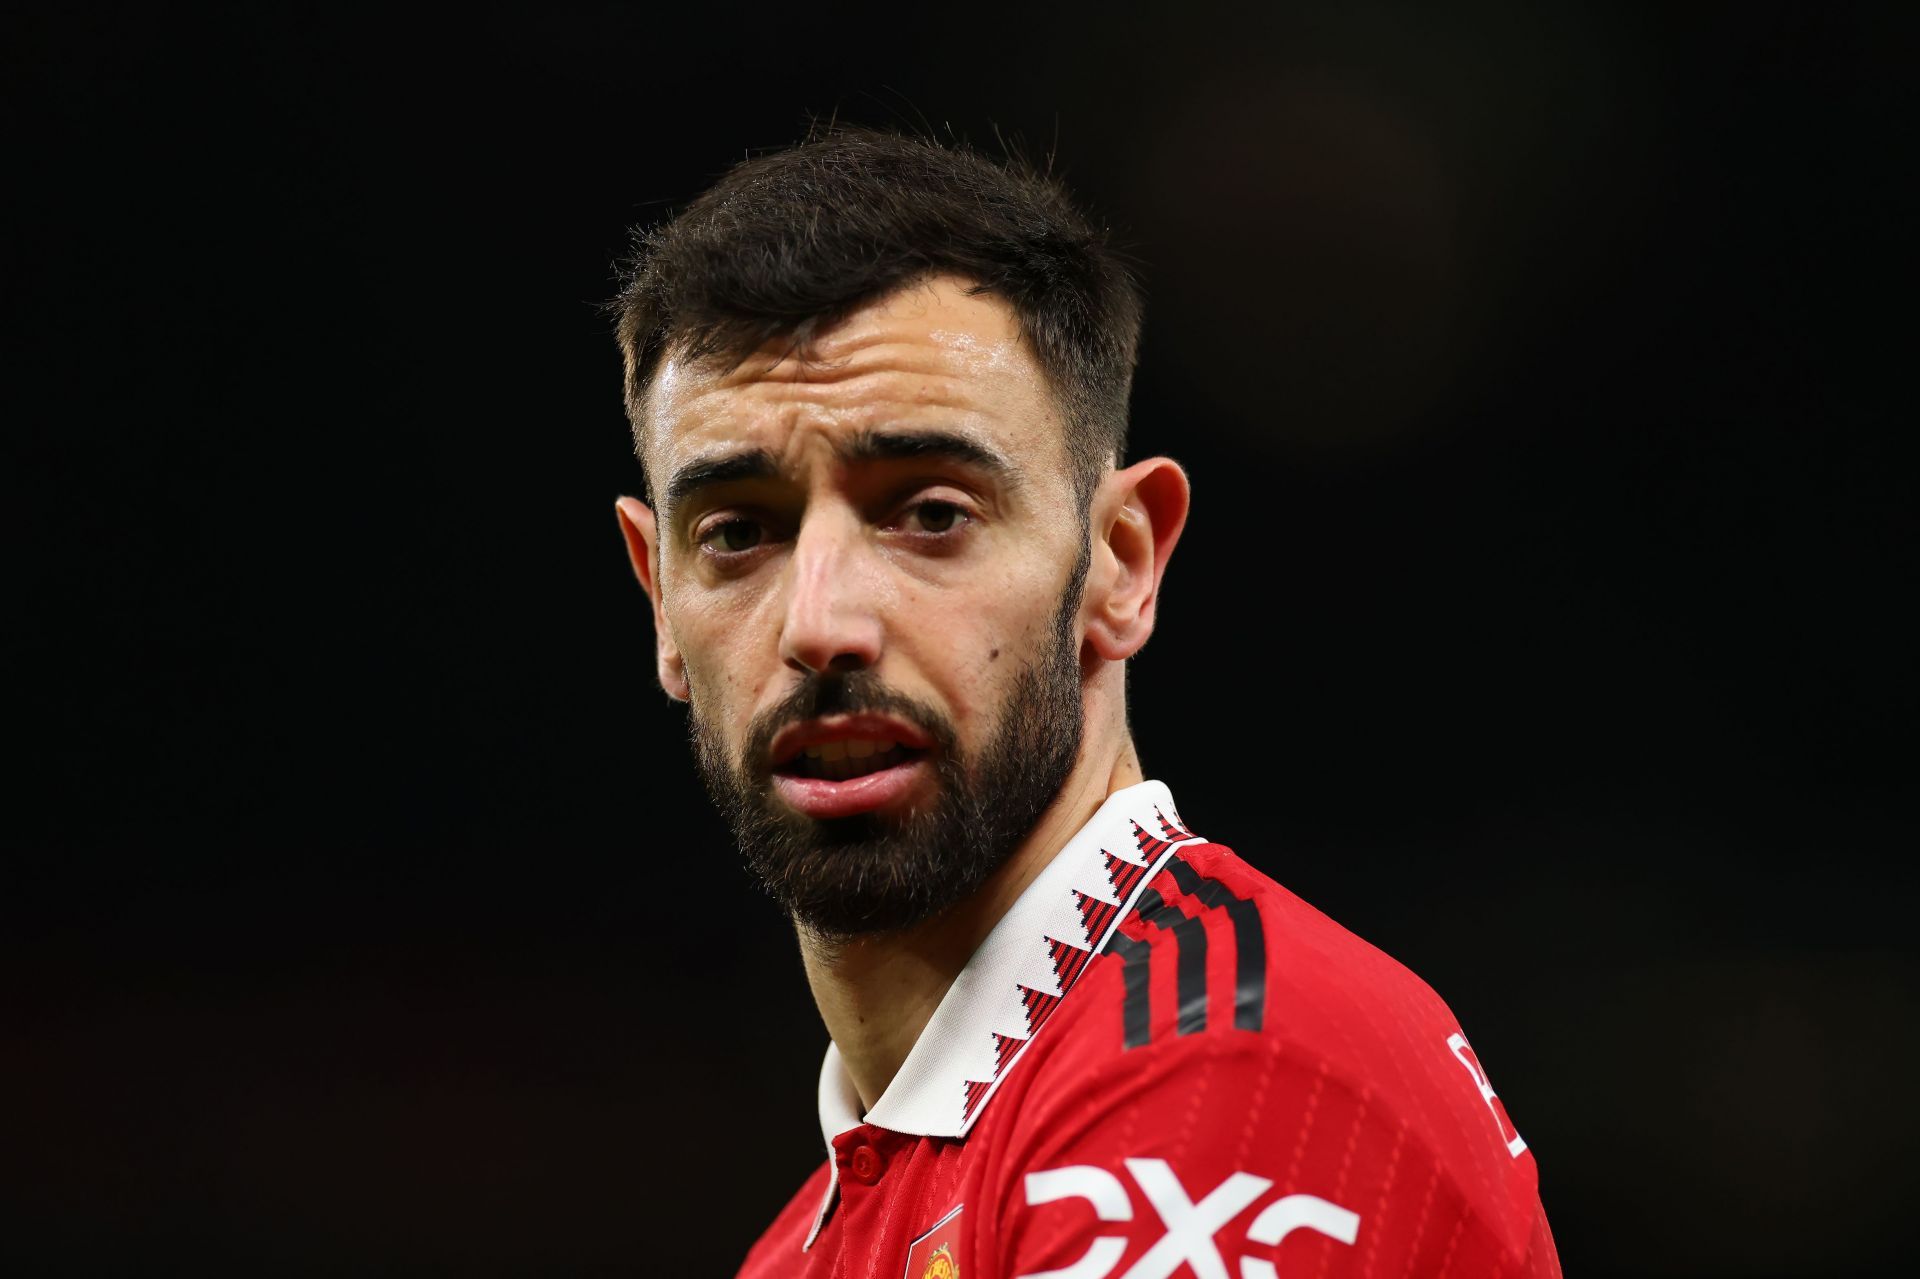 Bruno Fernandes was not in his element this weekend.